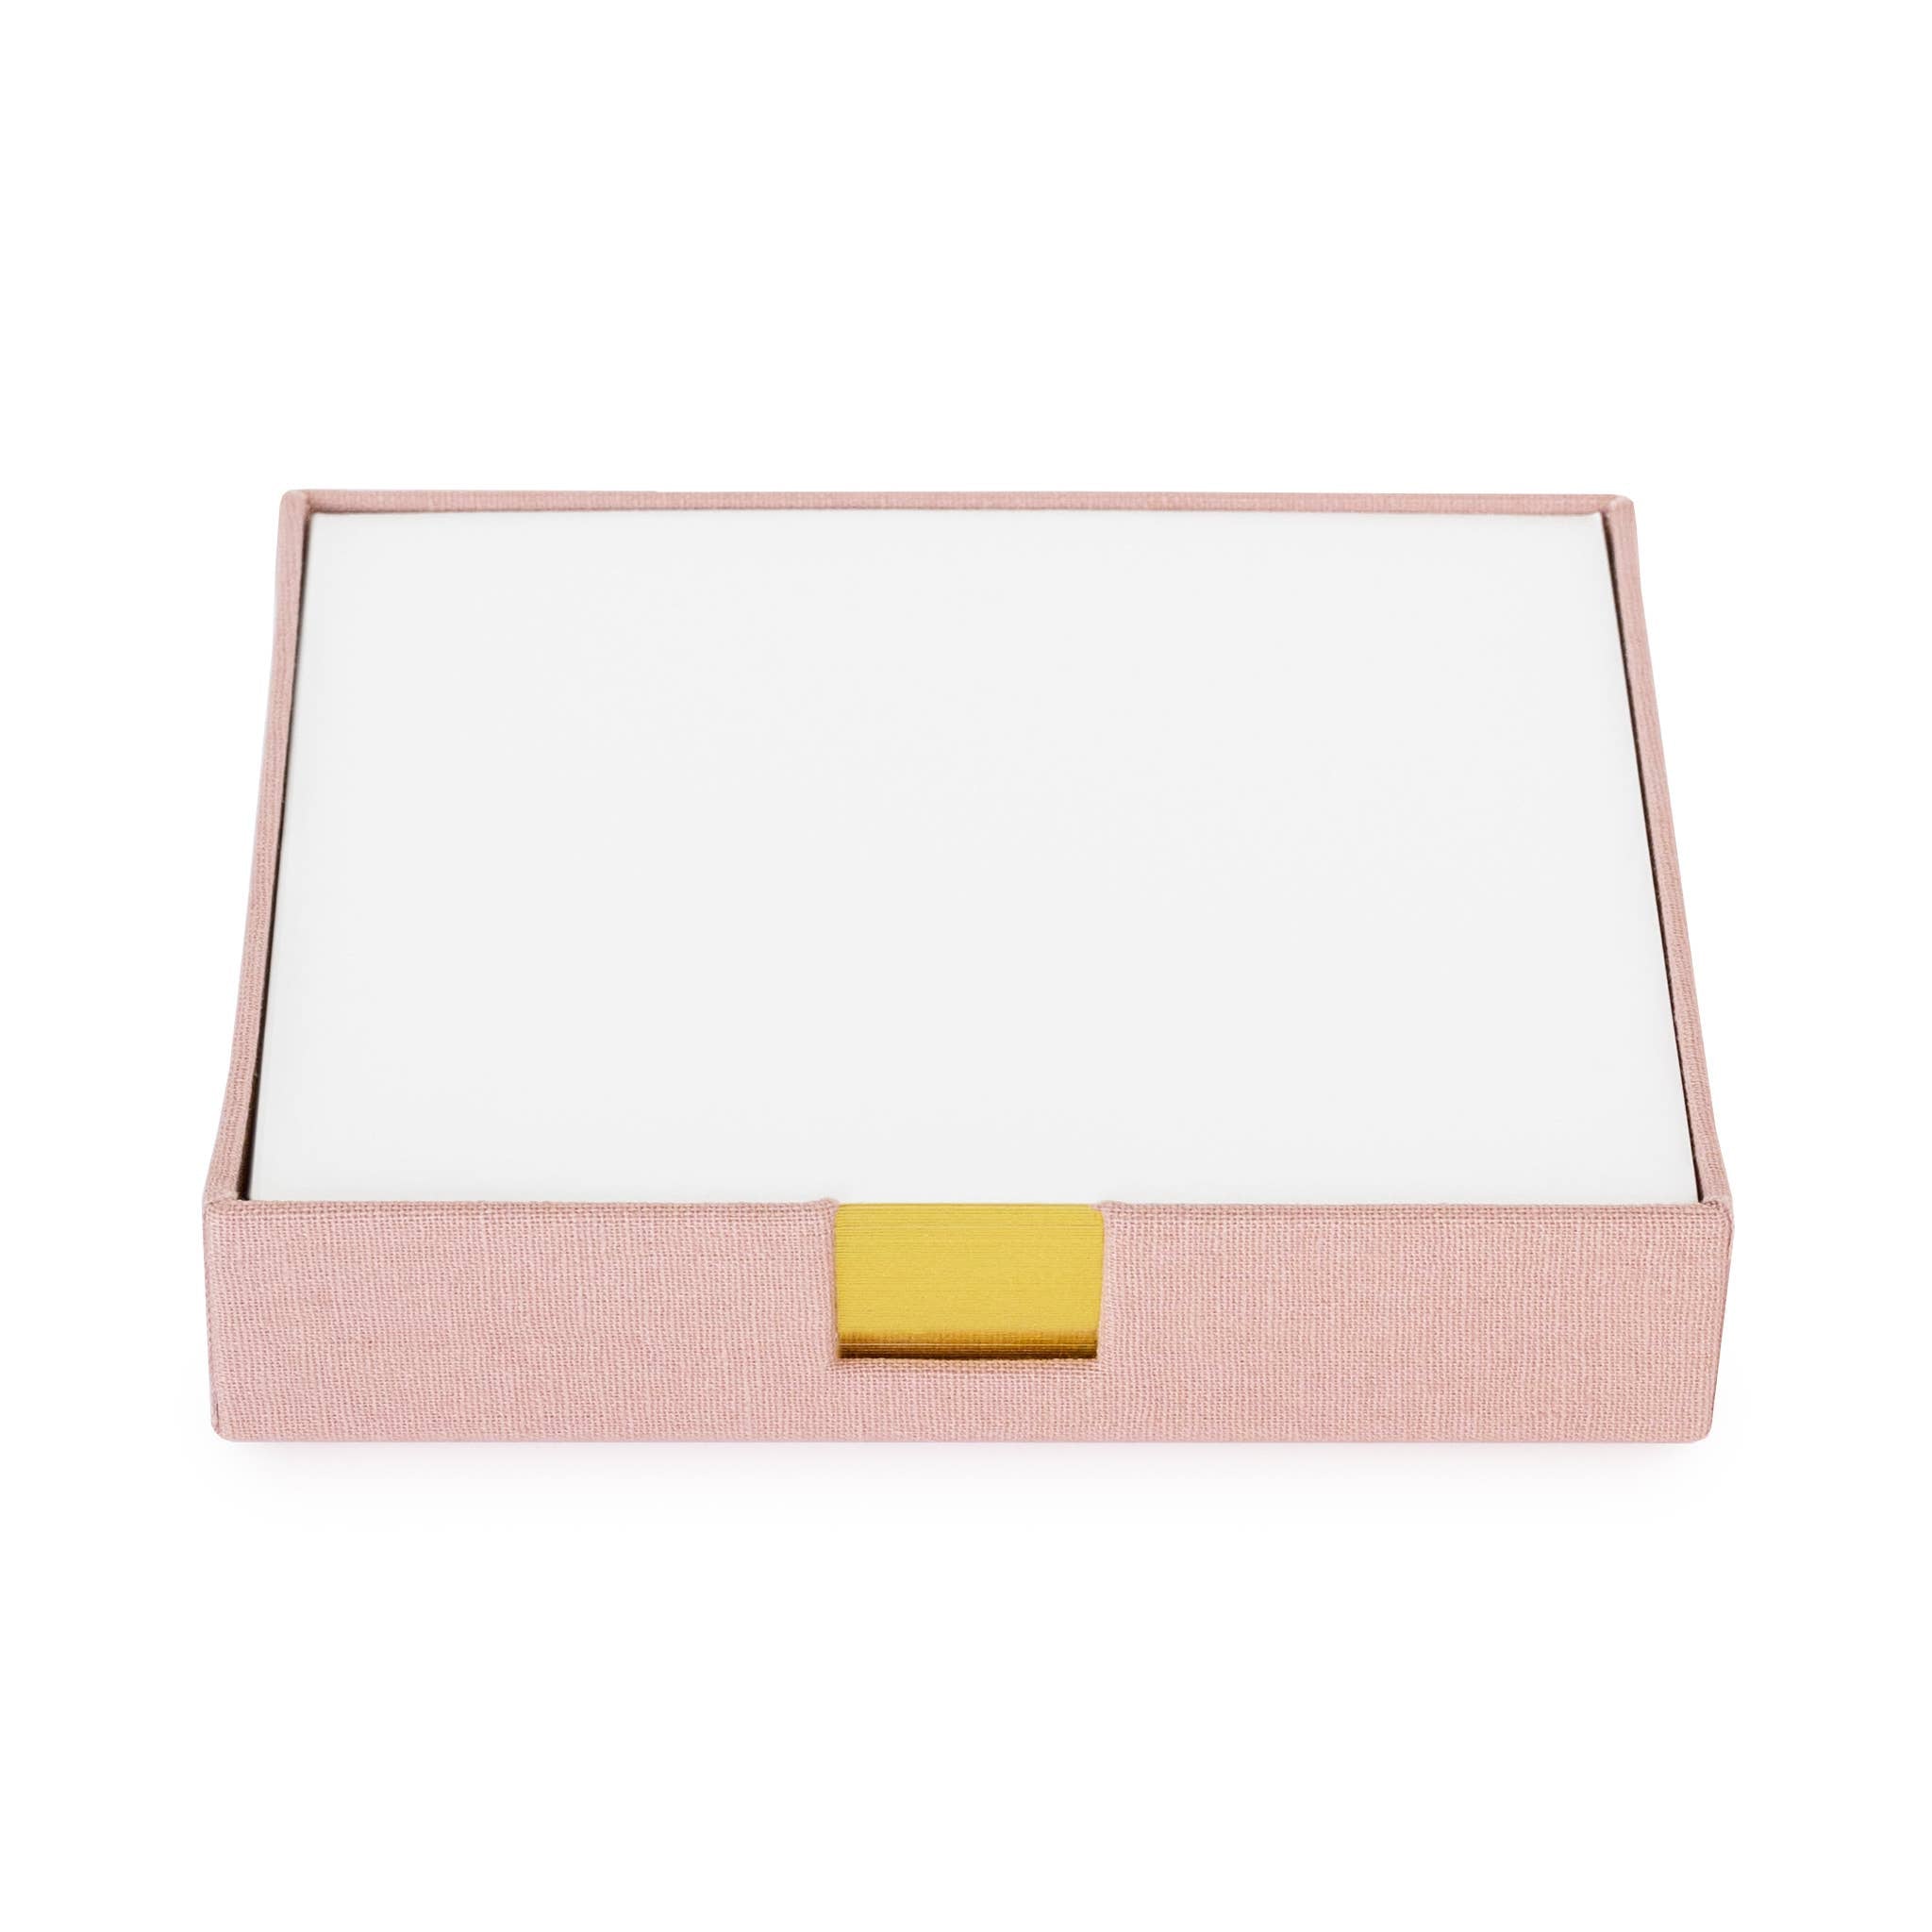 A pink canvas desk jotter with a gold foil label sits on a white background.